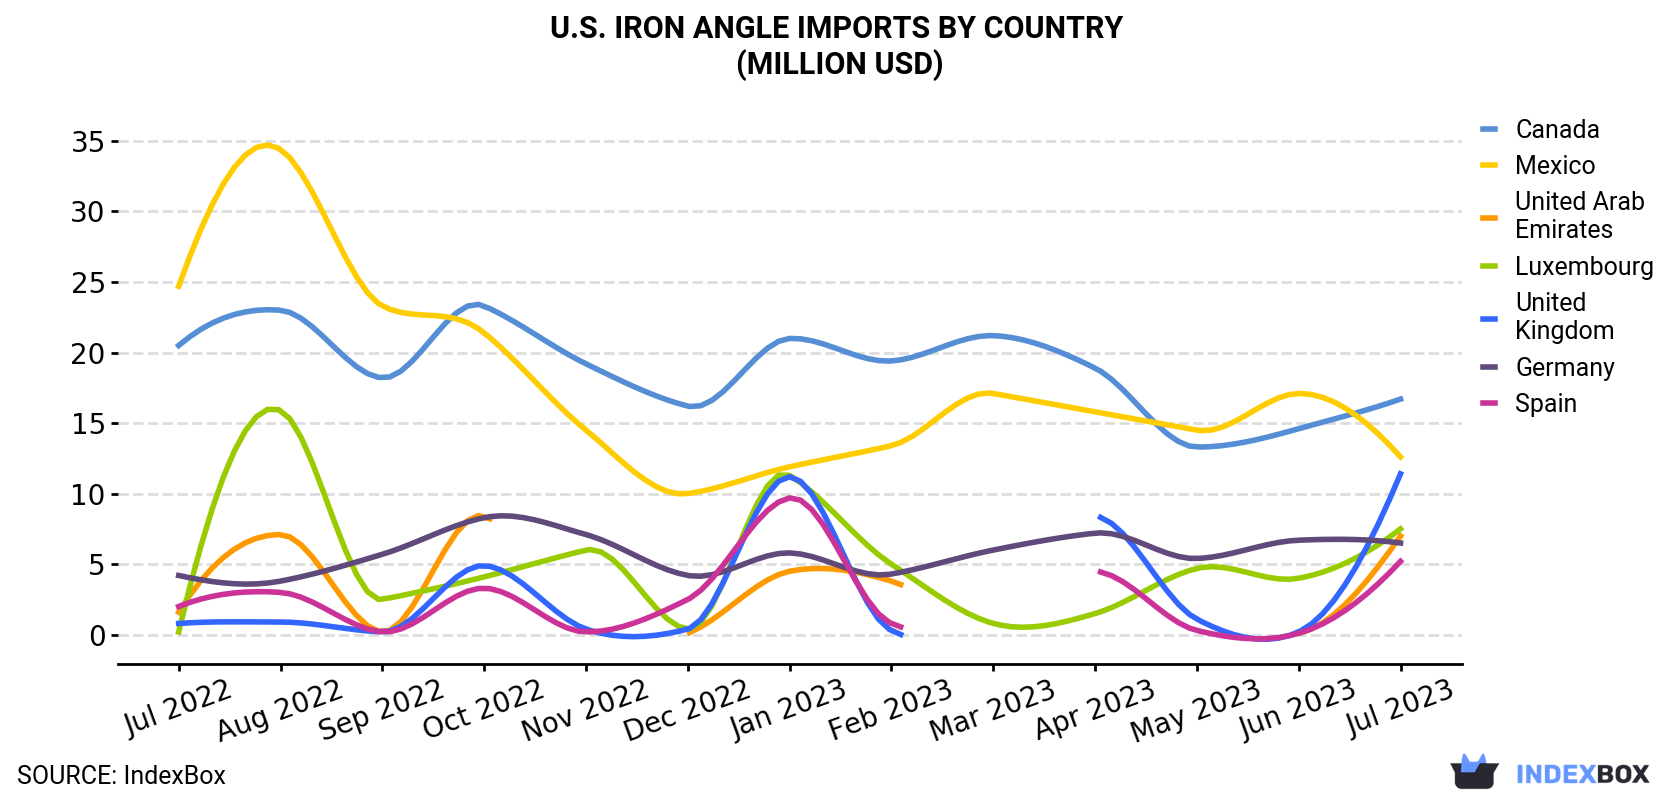 U.S. Iron Angle Imports By Country (Million USD)